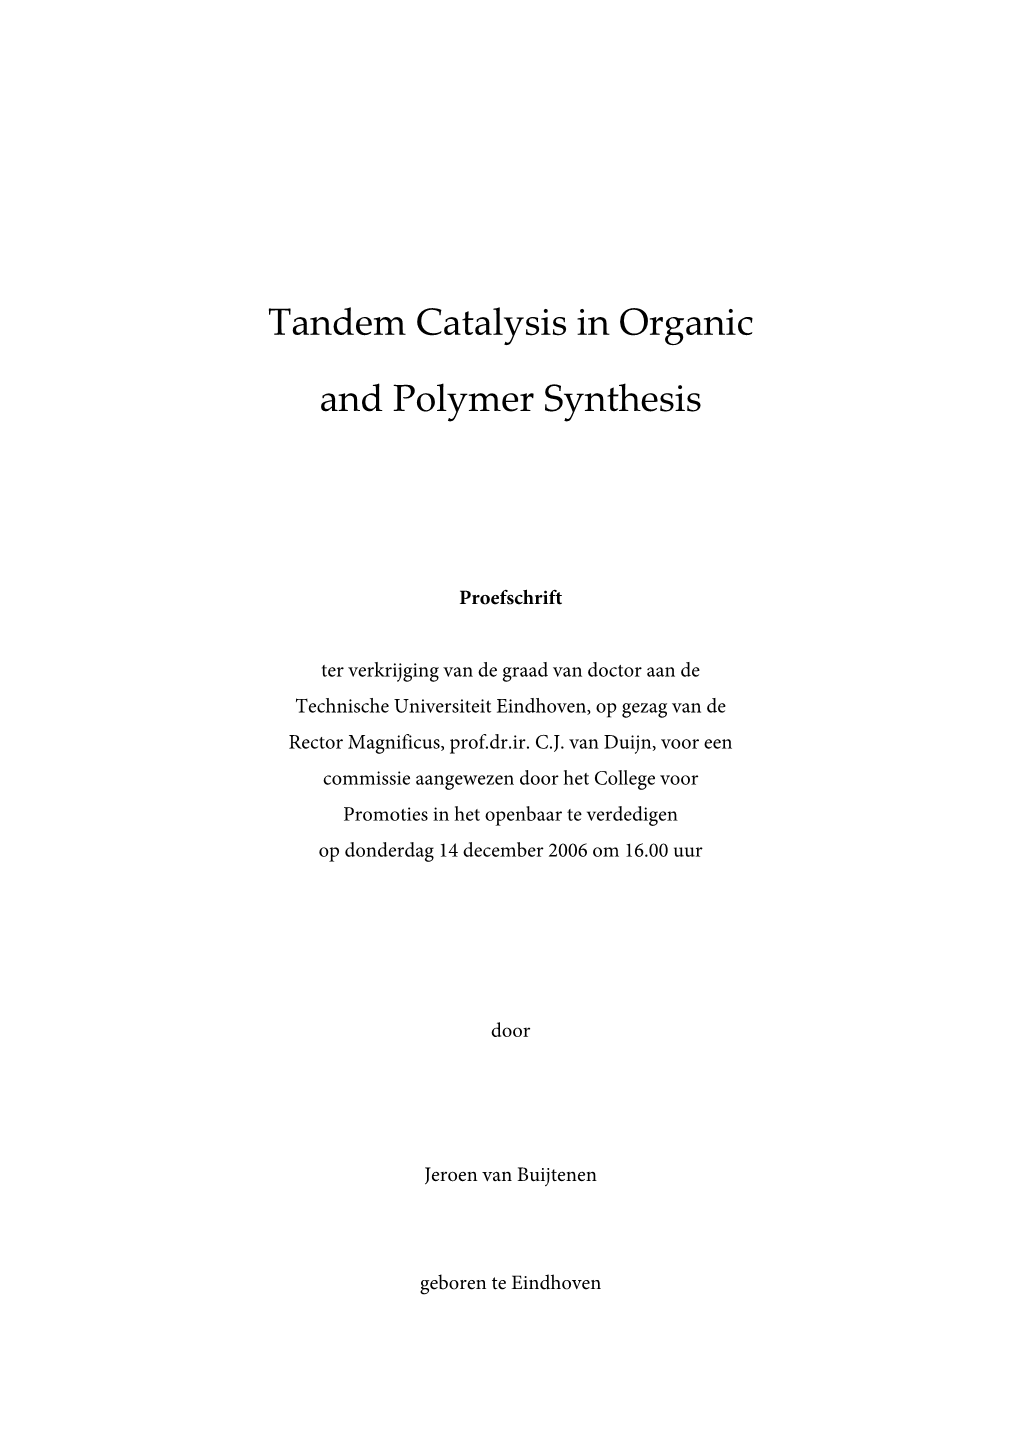 Tandem Catalysis in Organic and Polymer Synthesis